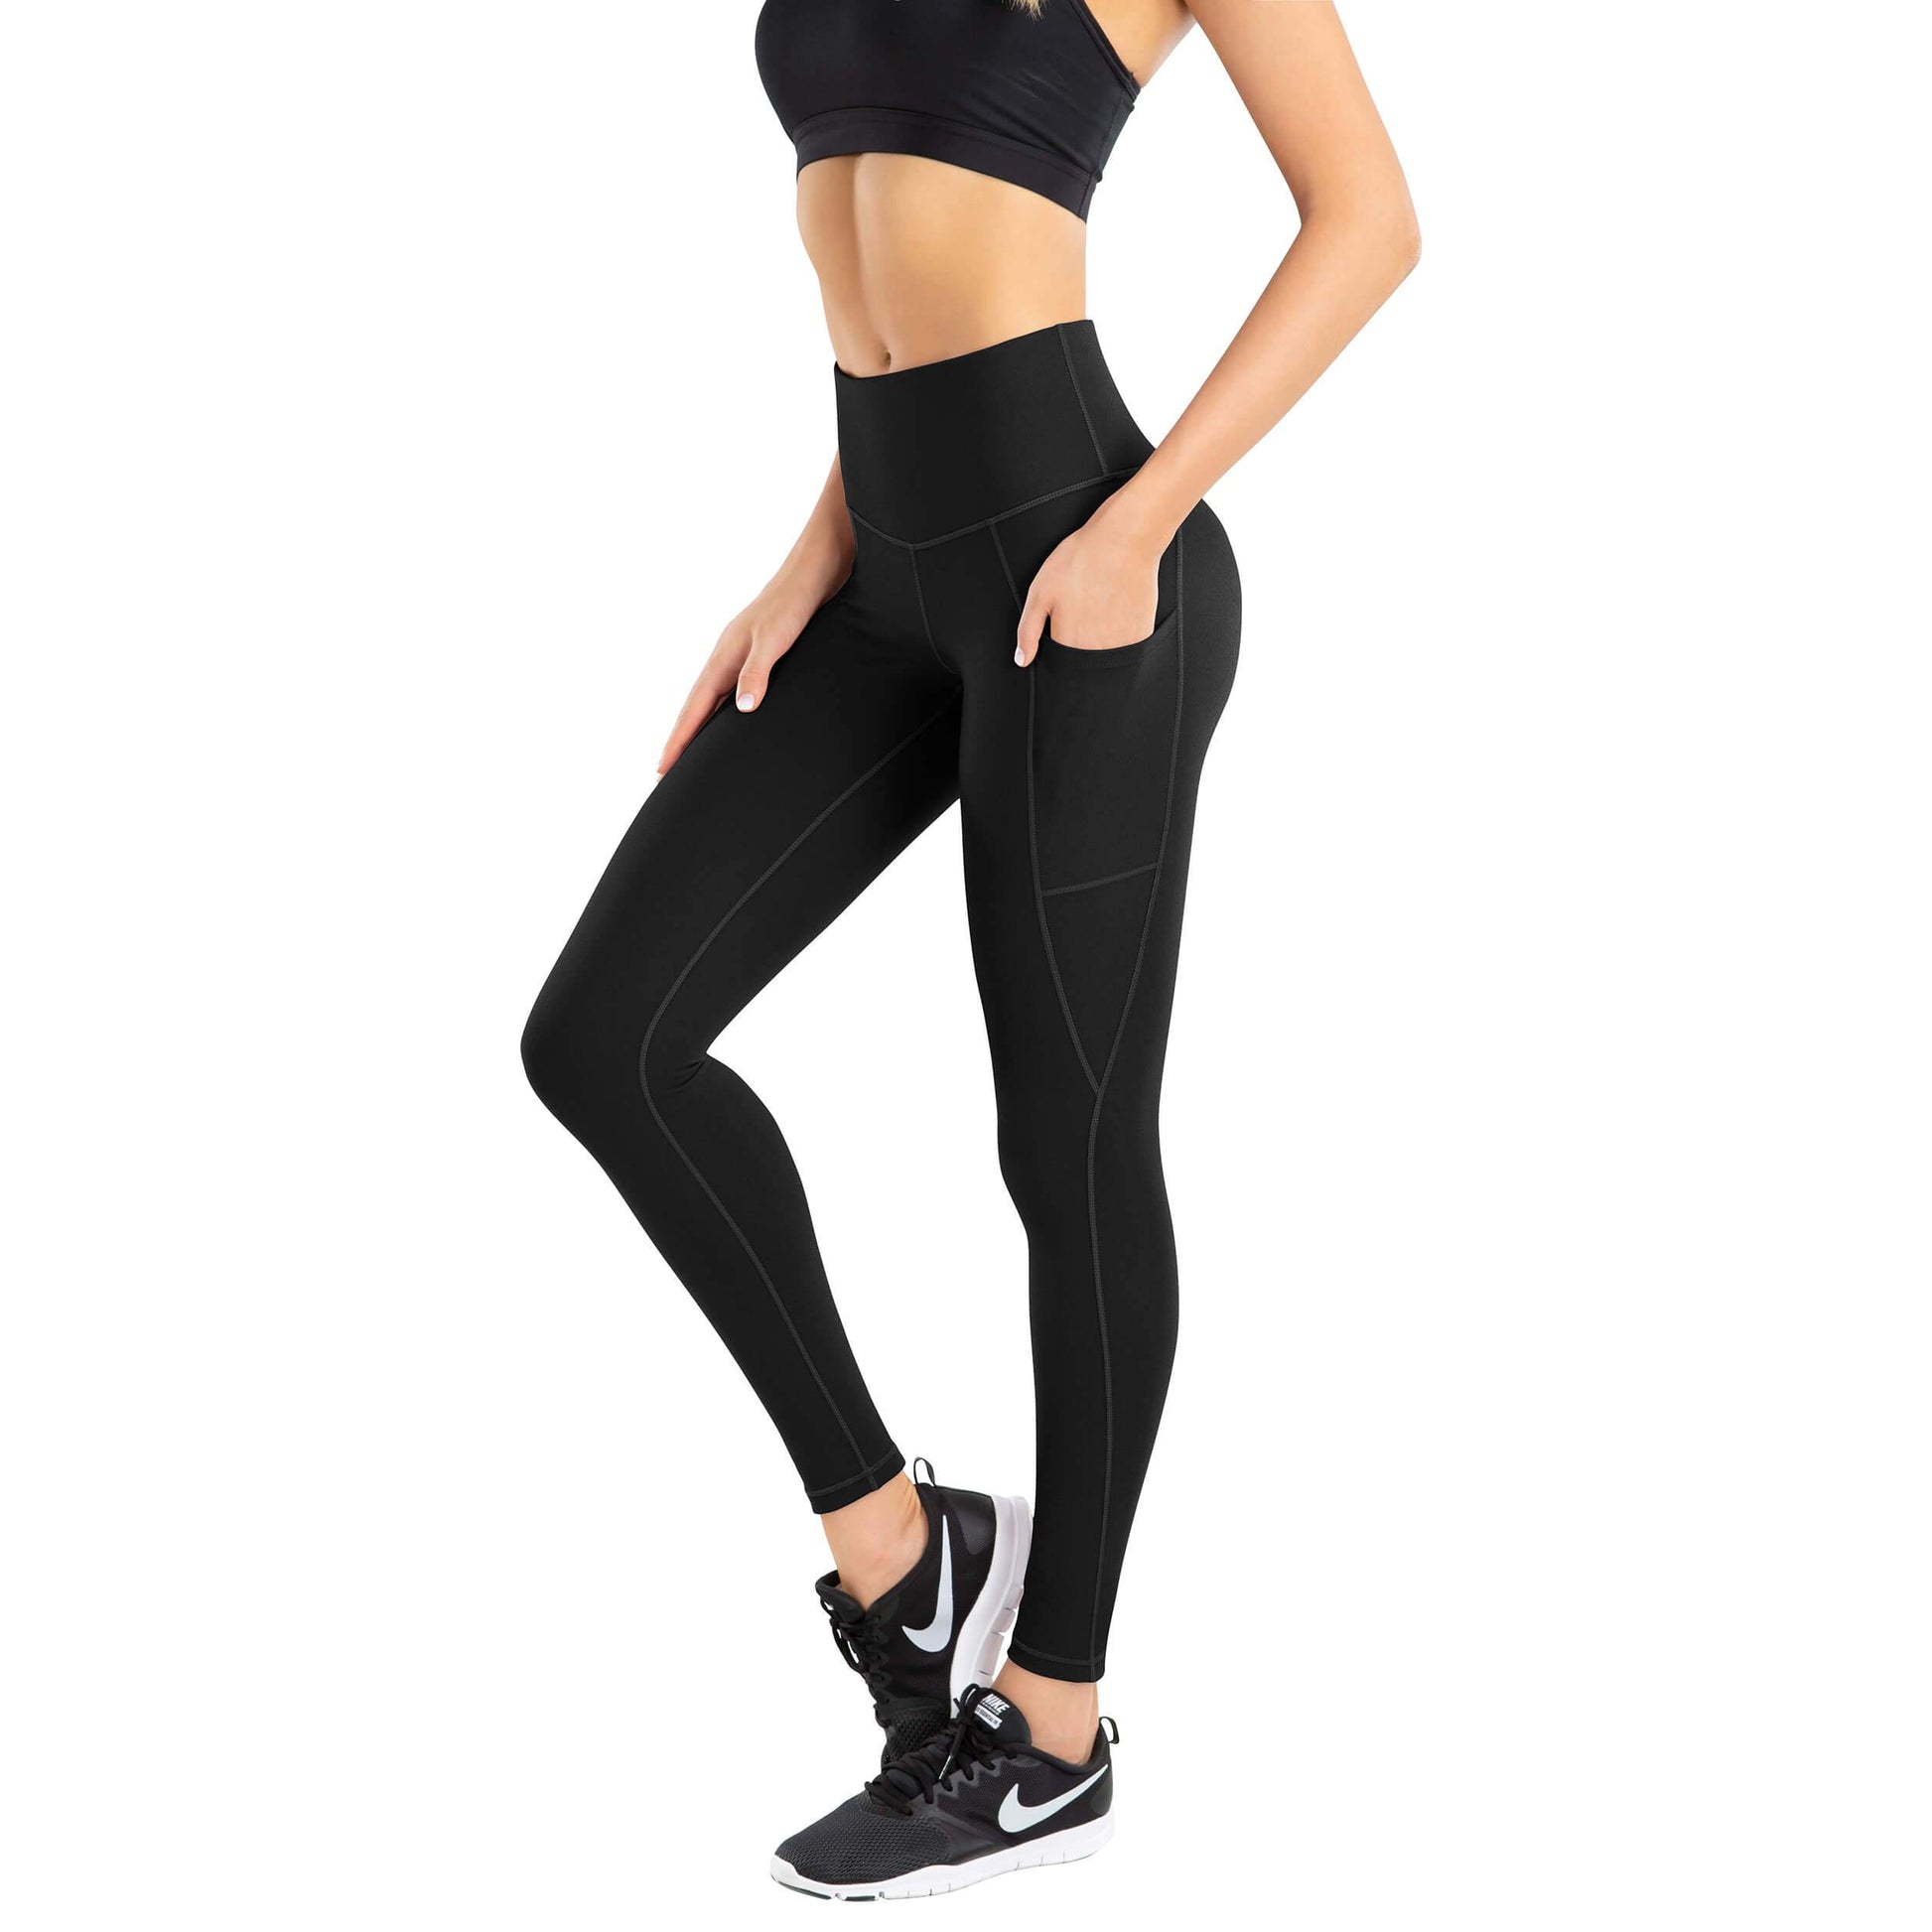 IUGA High Waist Yoga Pants with Pockets, Leggings for Women Tummy Control,  Workout Leggings for Women 4 Way Stretch Black in Bahrain